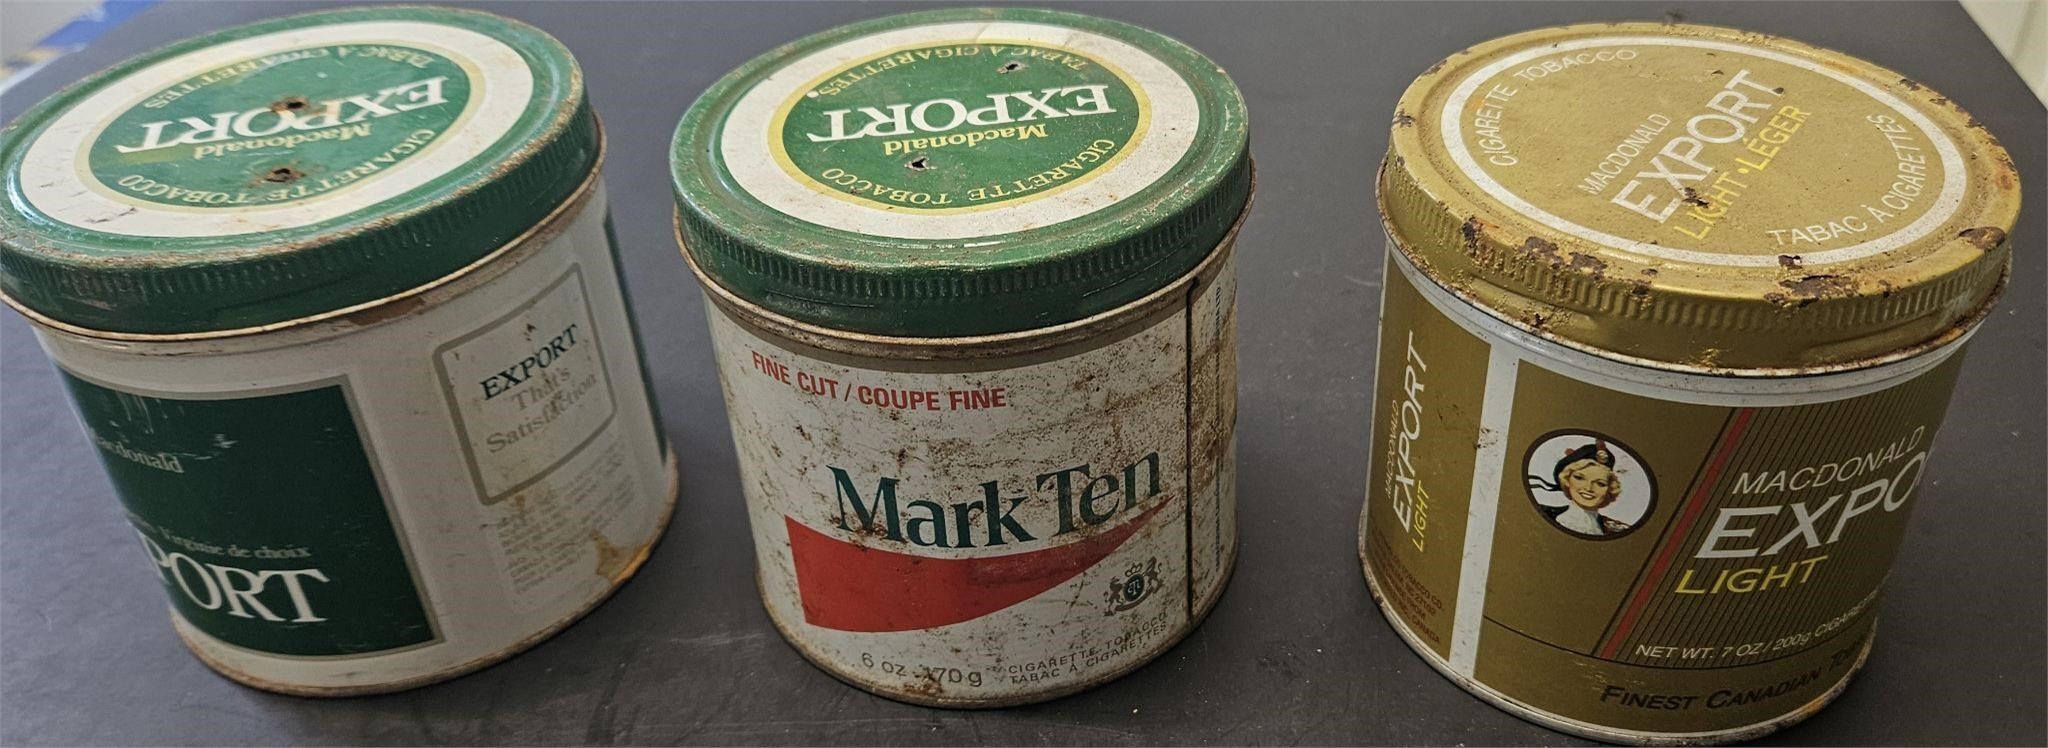 3 old tabaco tin can check pictures for condition